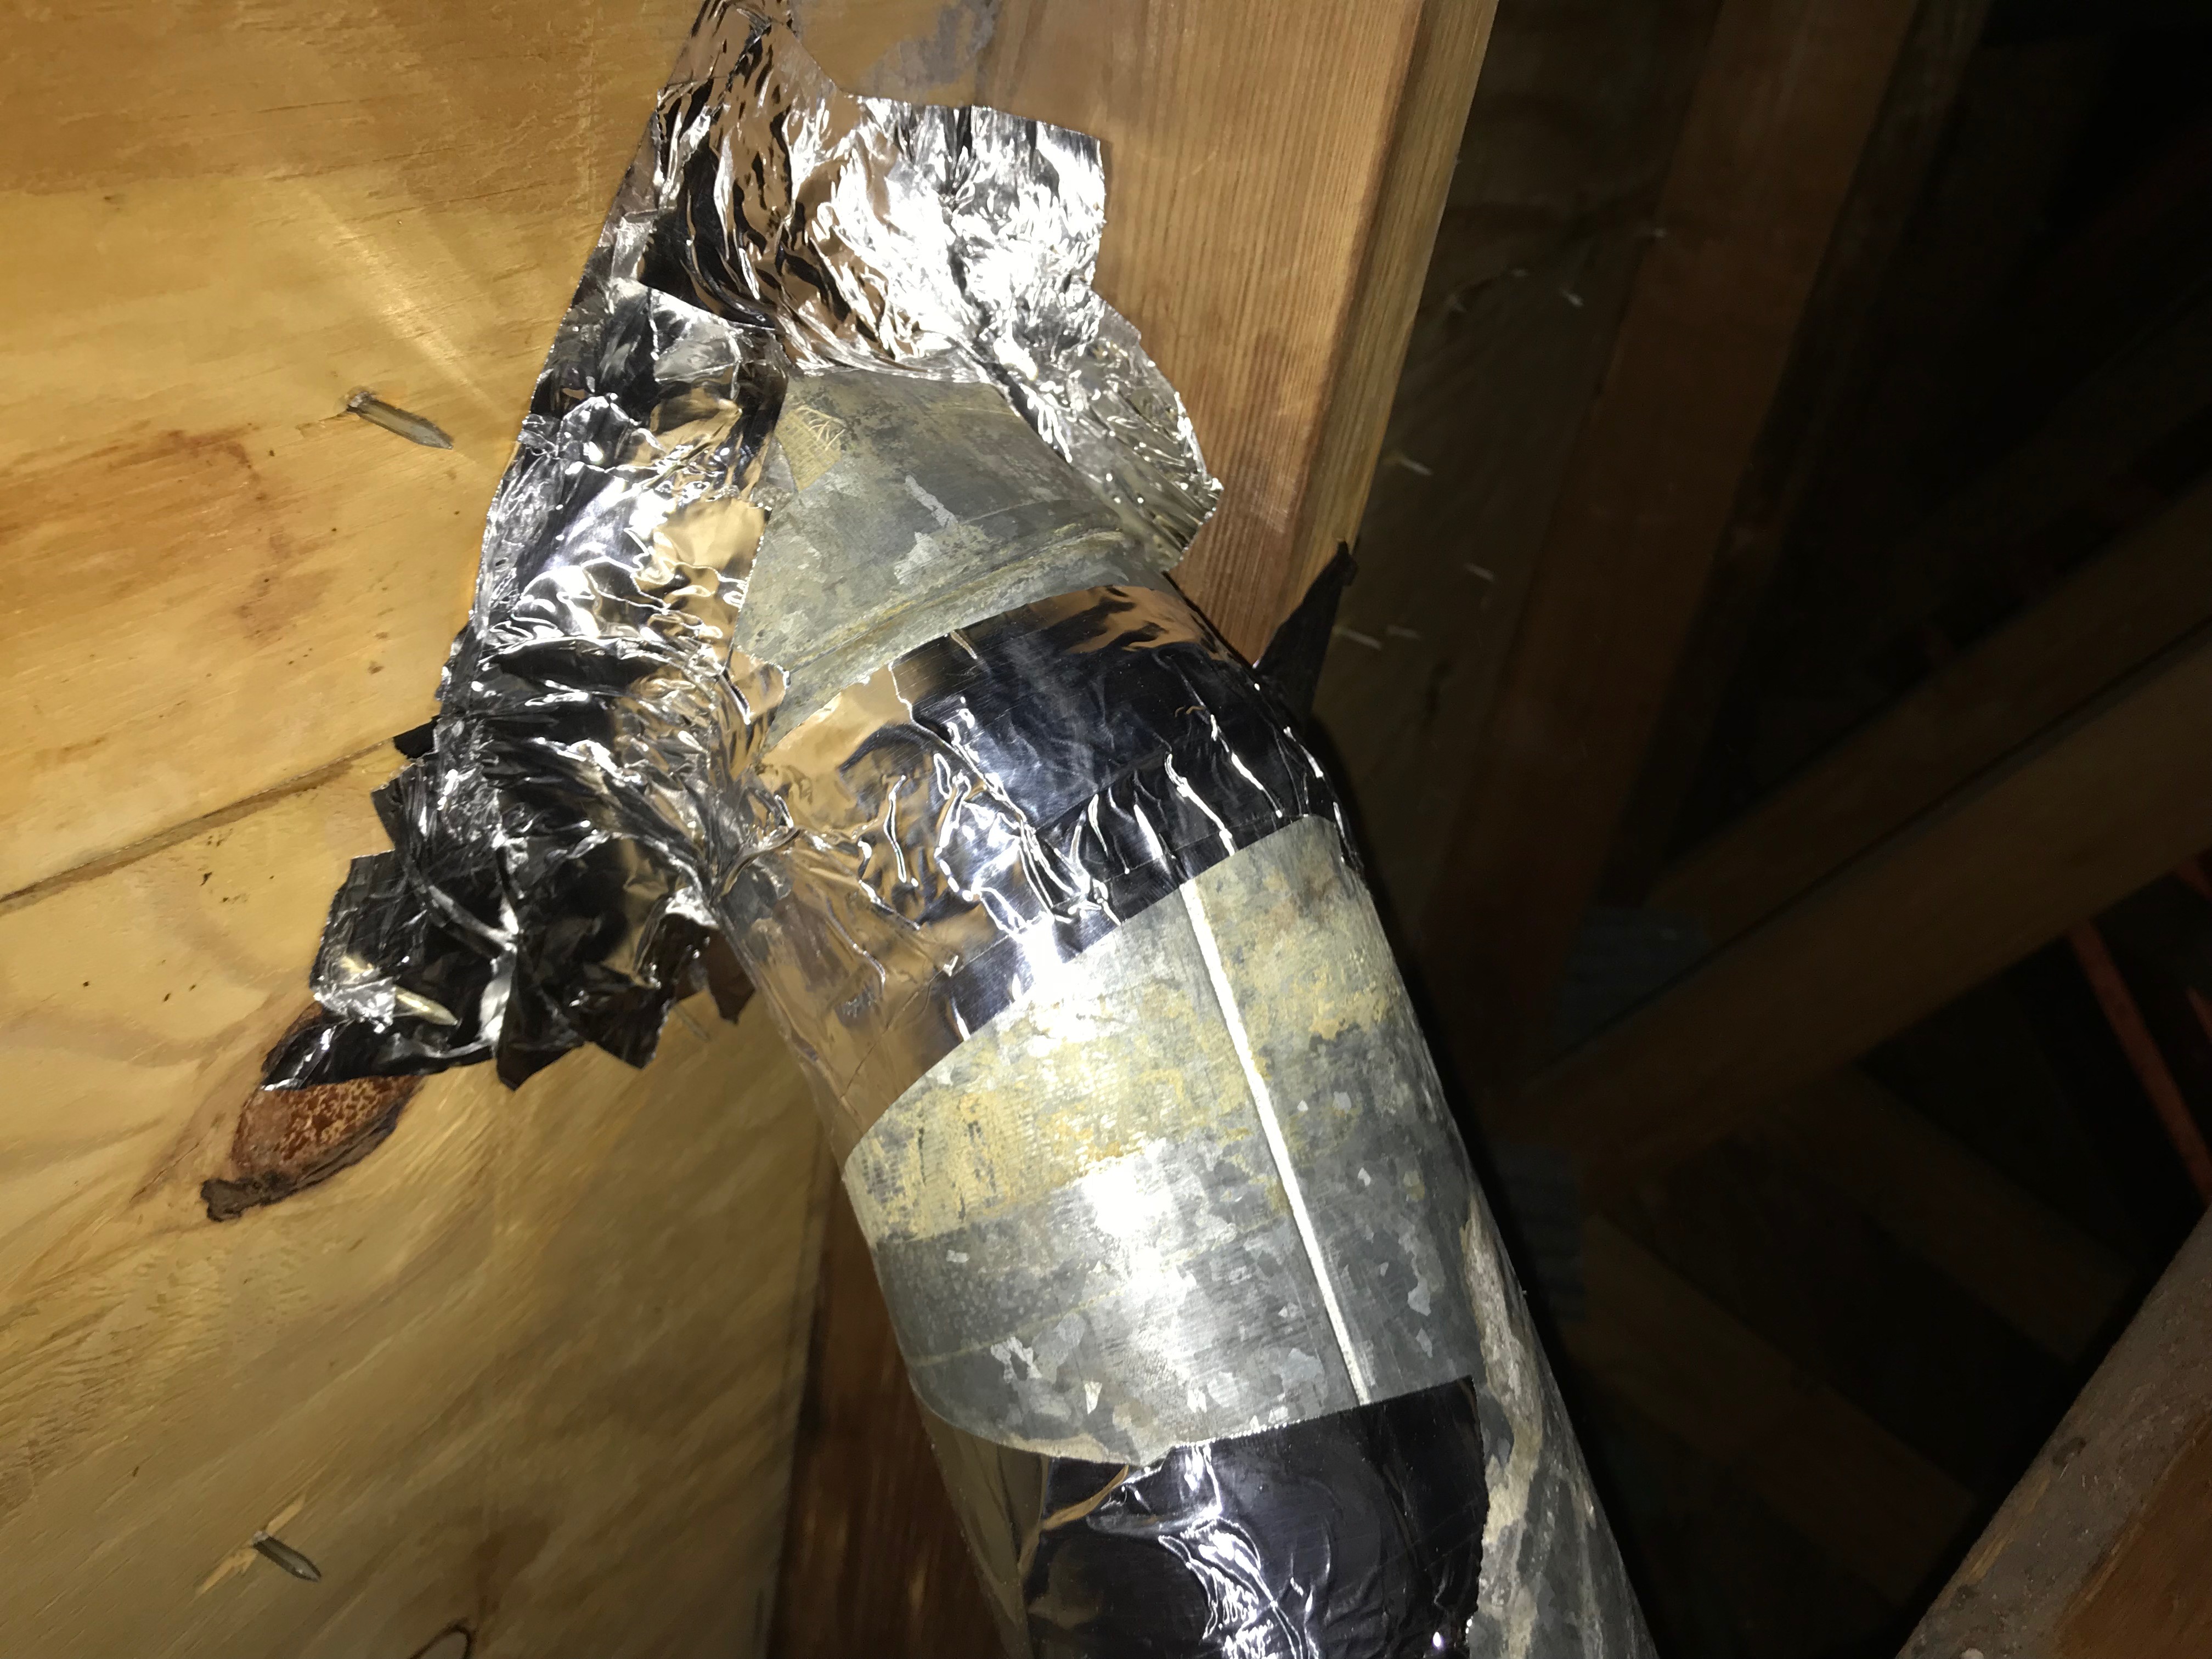 dryer vent cleaning Dryer Vent Cleaning Experts NYC NJ CT